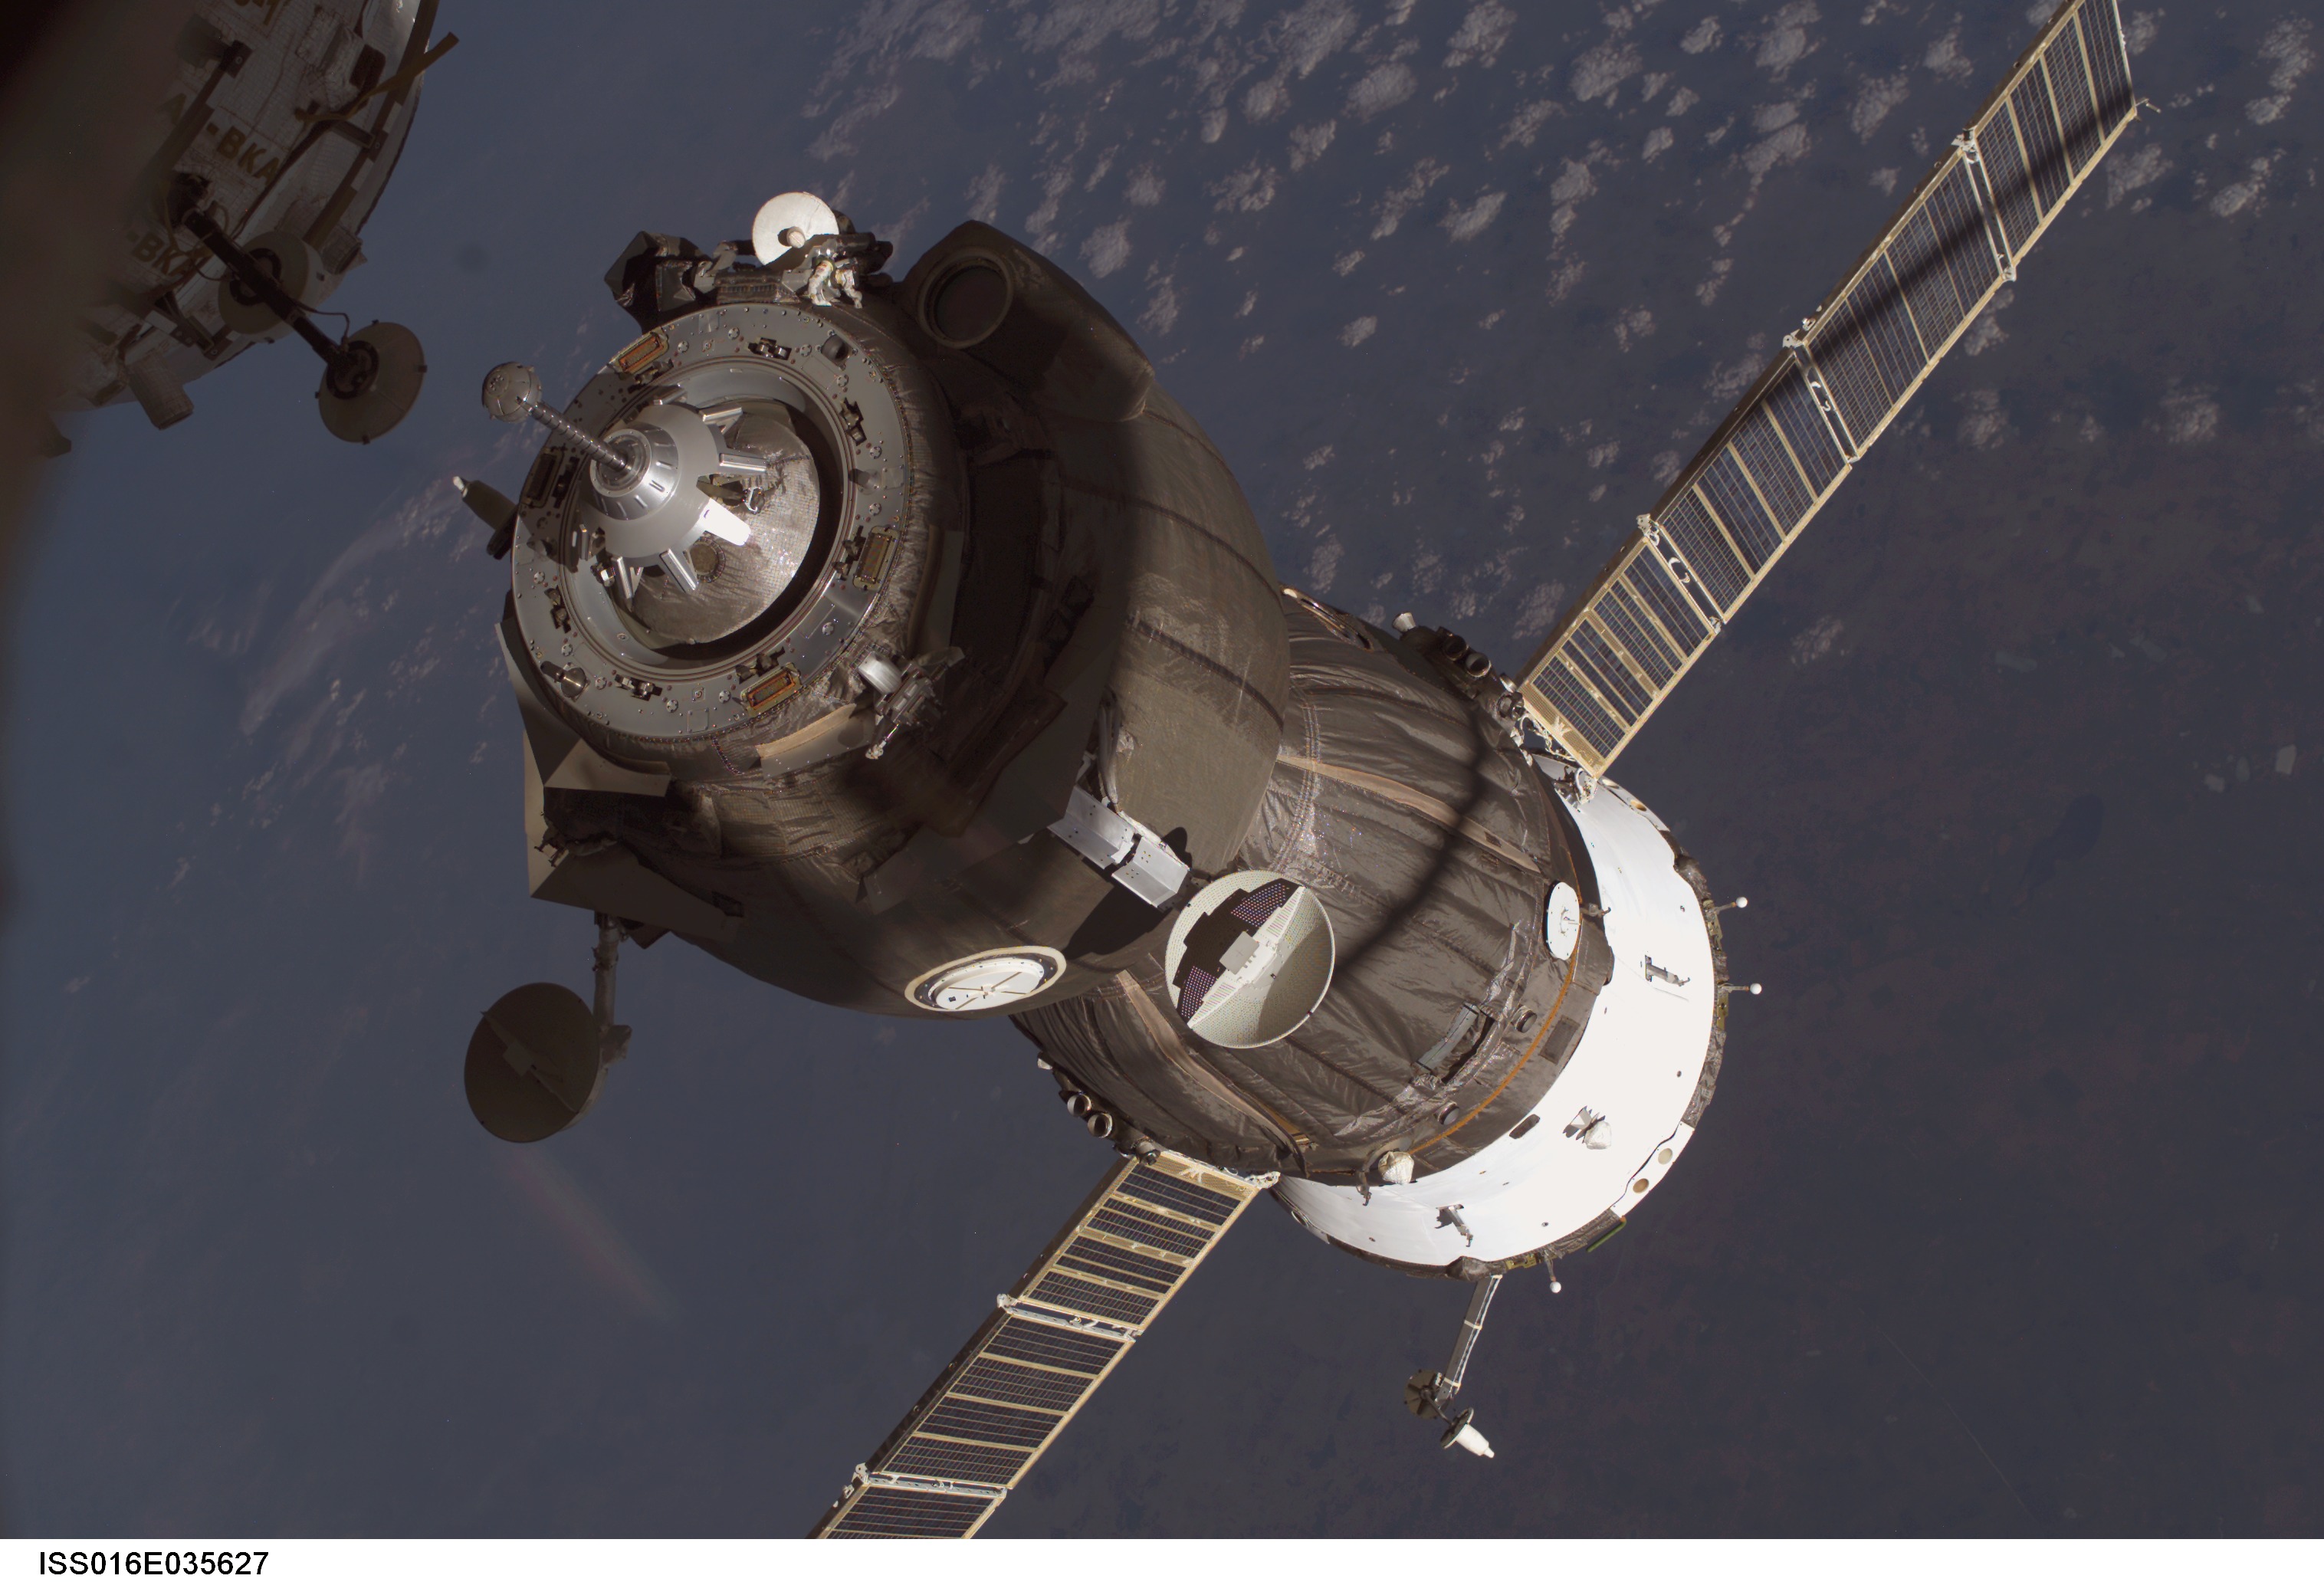 A Supply Ship Docks with the International Space Station